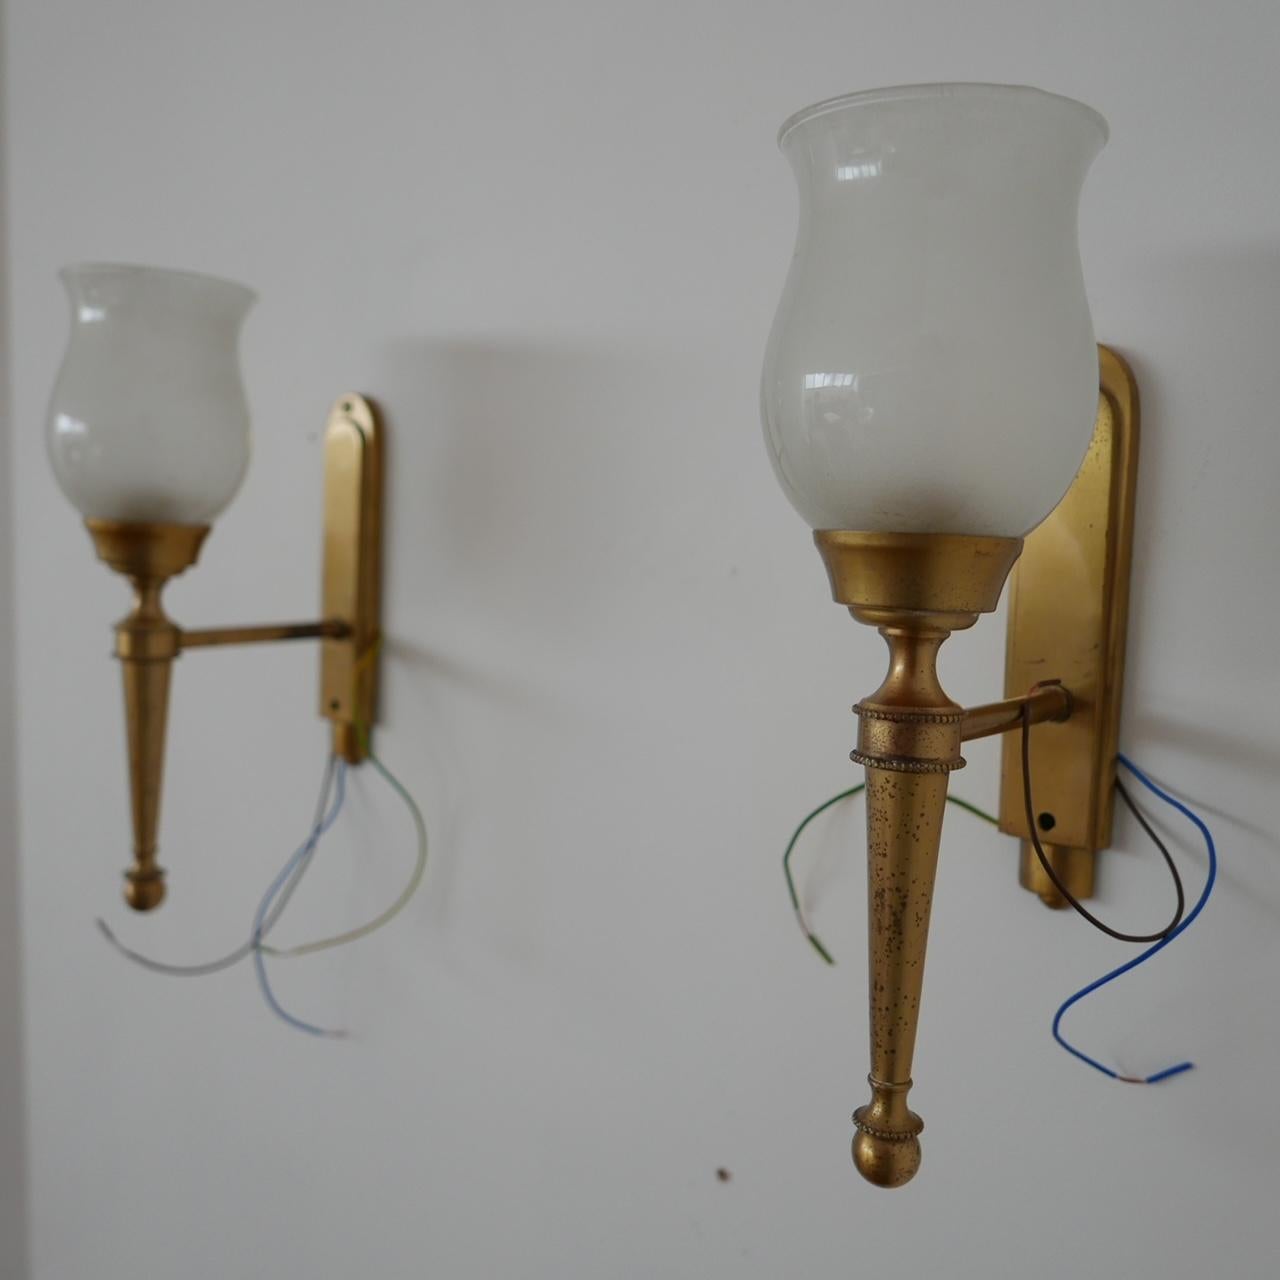 A pair of simple but elegant brass and glass wall lights.

France, circa 1960s.

Naturally patinated brass wall galleries, slightly opaque shades.

Re-wired and PAT tested.

Location: Belgium Gallery.

Dimensions: 30 H x 9 W x 16 D in